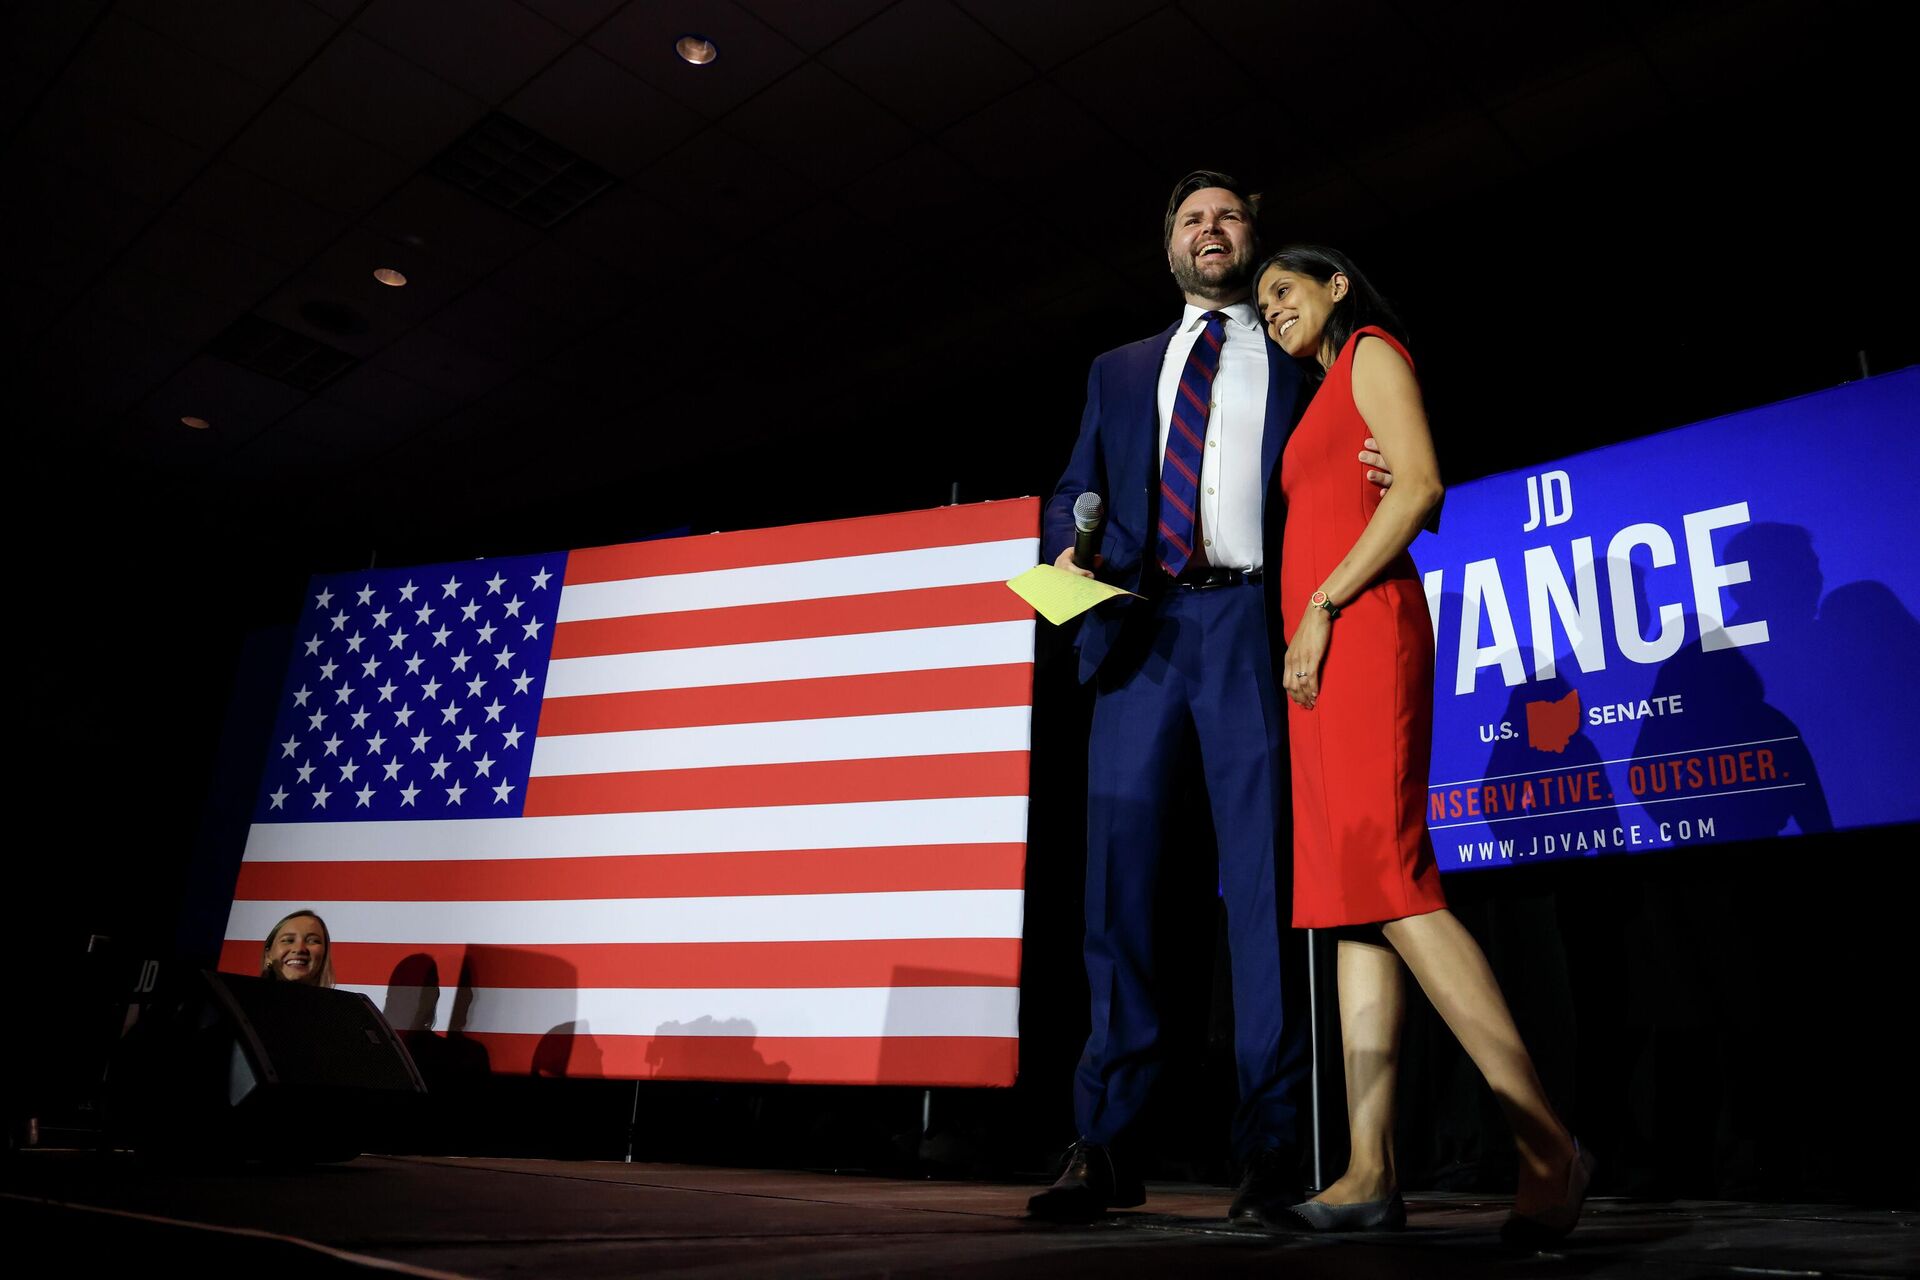 Republican Senate candidate JD Vance, left, is hugs his wife Usha Vance, as he prepares to speak to supporters during an election night watch party, Tuesday, May 3, 2022, in Cincinnati. - Sputnik International, 1920, 23.05.2022